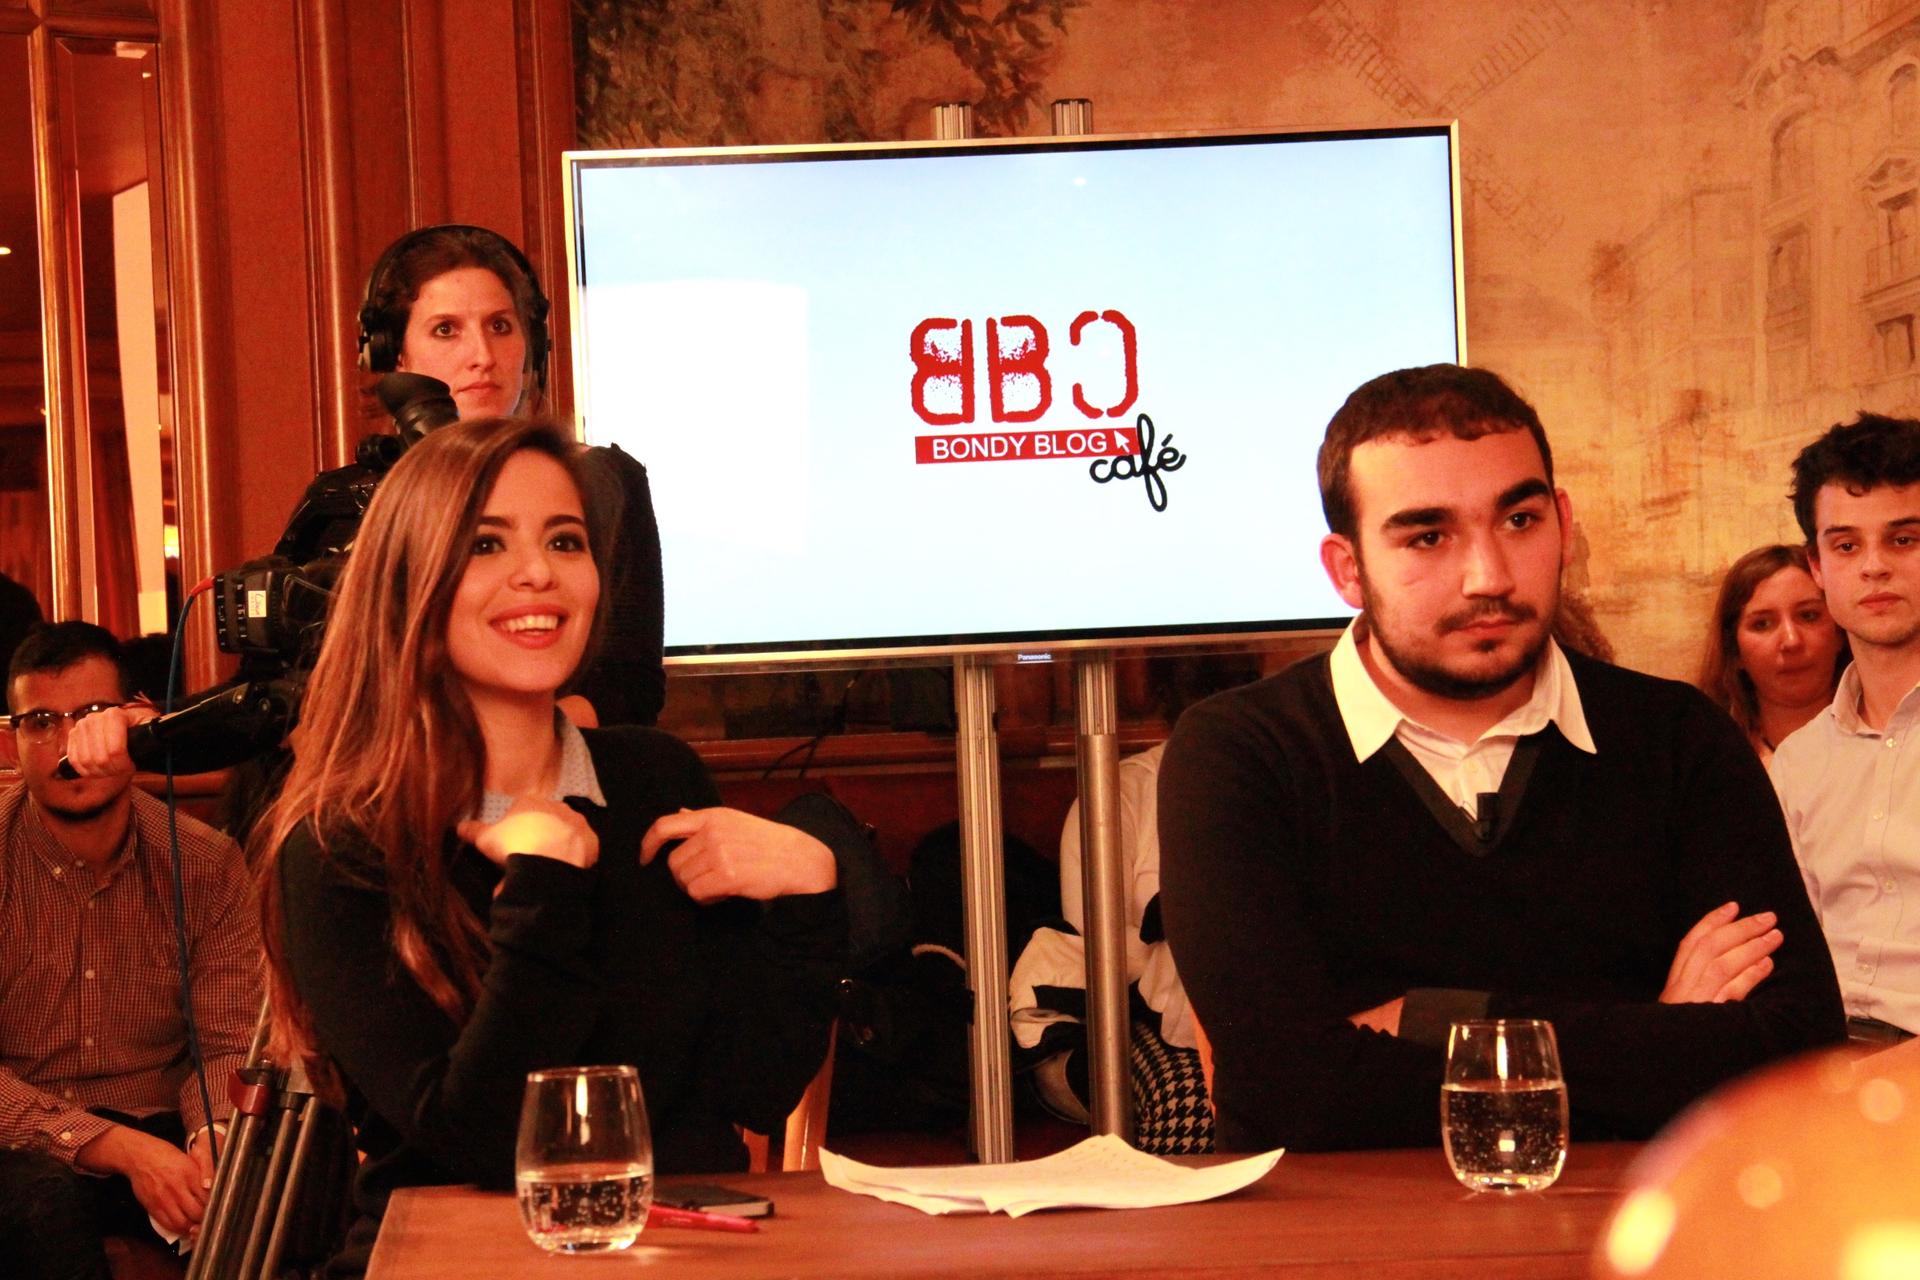 Young bloggers from the suburbs of Paris participate in the Bondy Blog roundtable discussion.